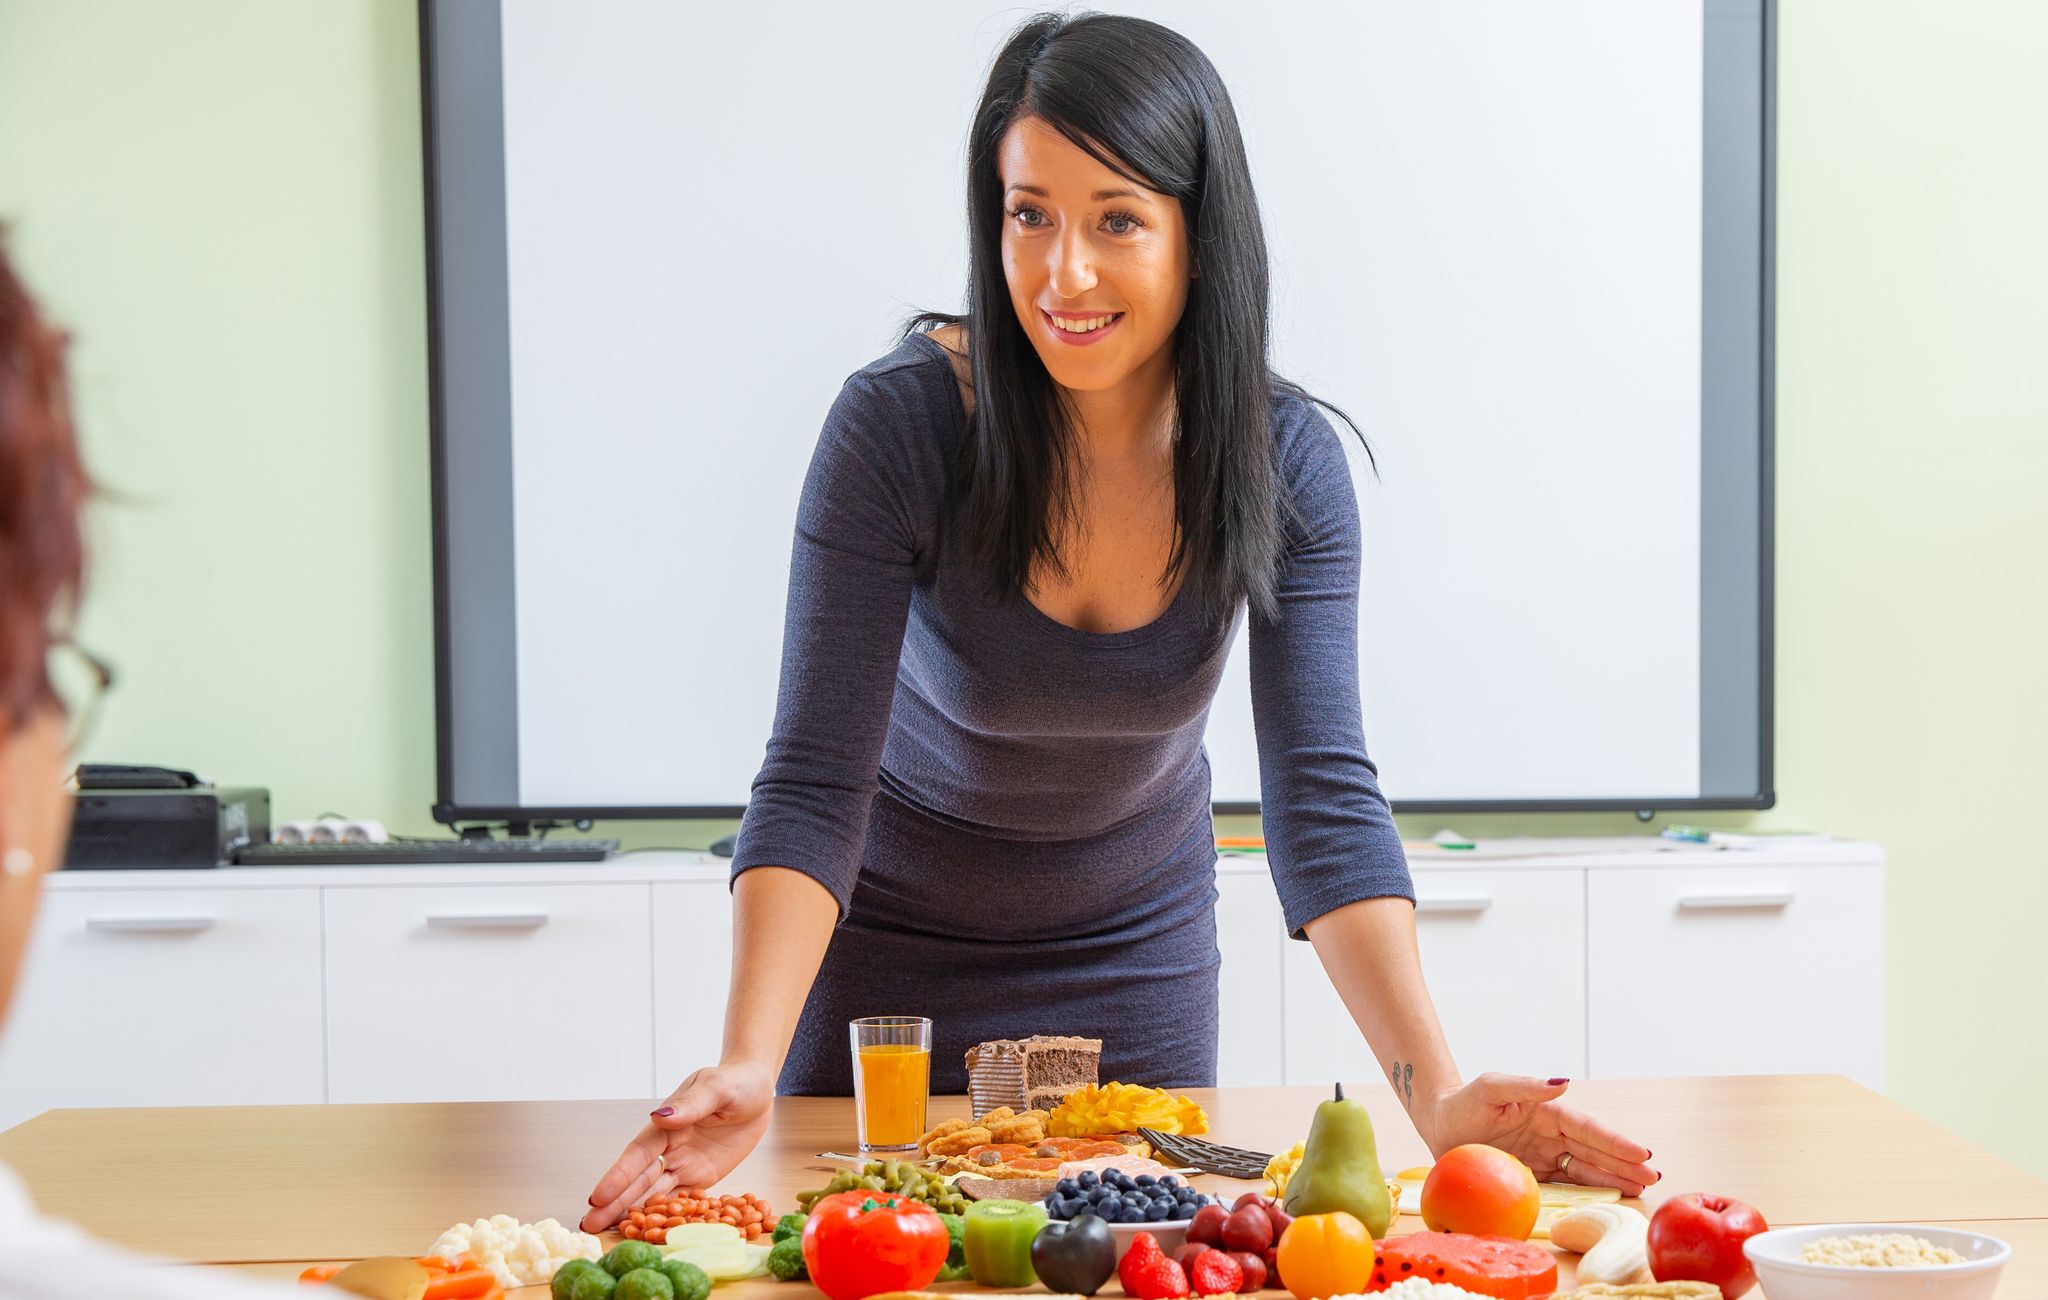 attractive female doctor presenting about healthy eating using food pyramid   stock photo